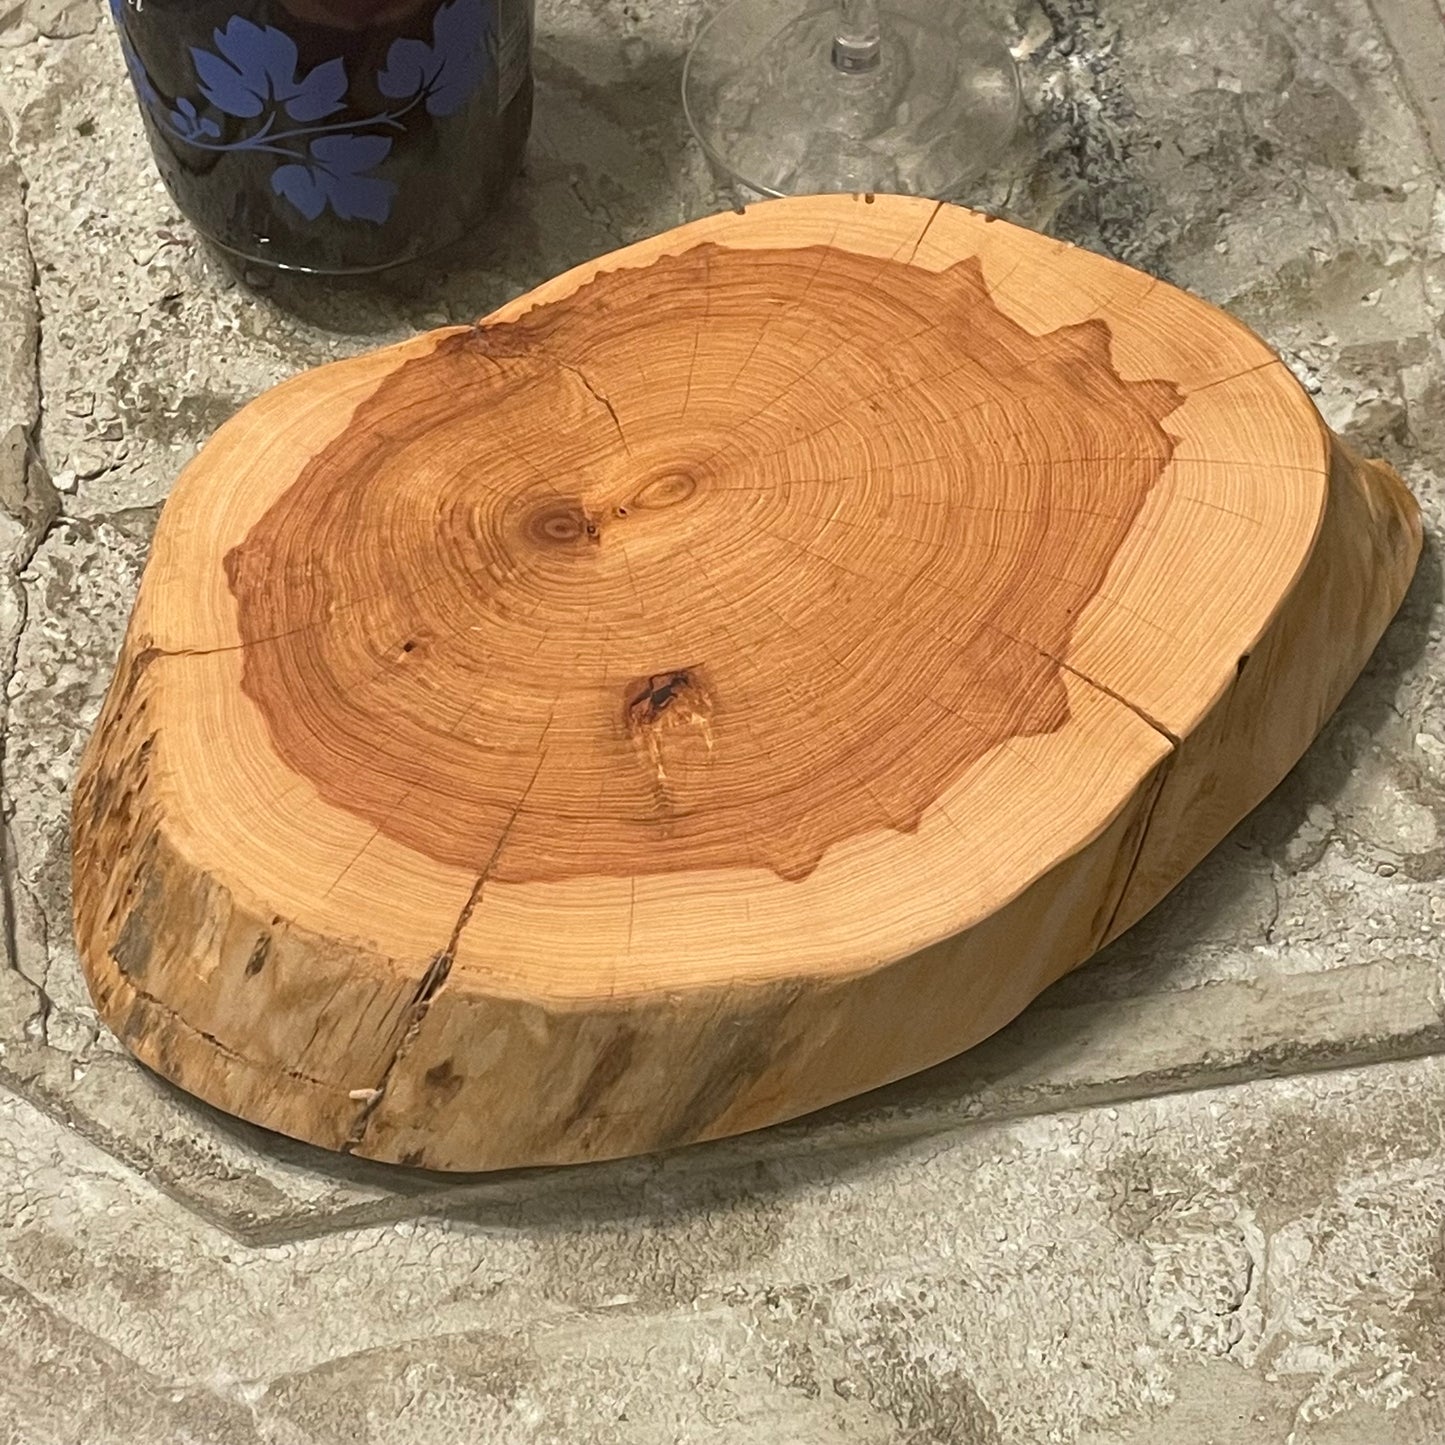 Live Edge Juniper Wood Charcuterie Board Small Oval/10-11" Hand Crafted Entertaining Party Hosting Holiday Gift Idea Housewarming